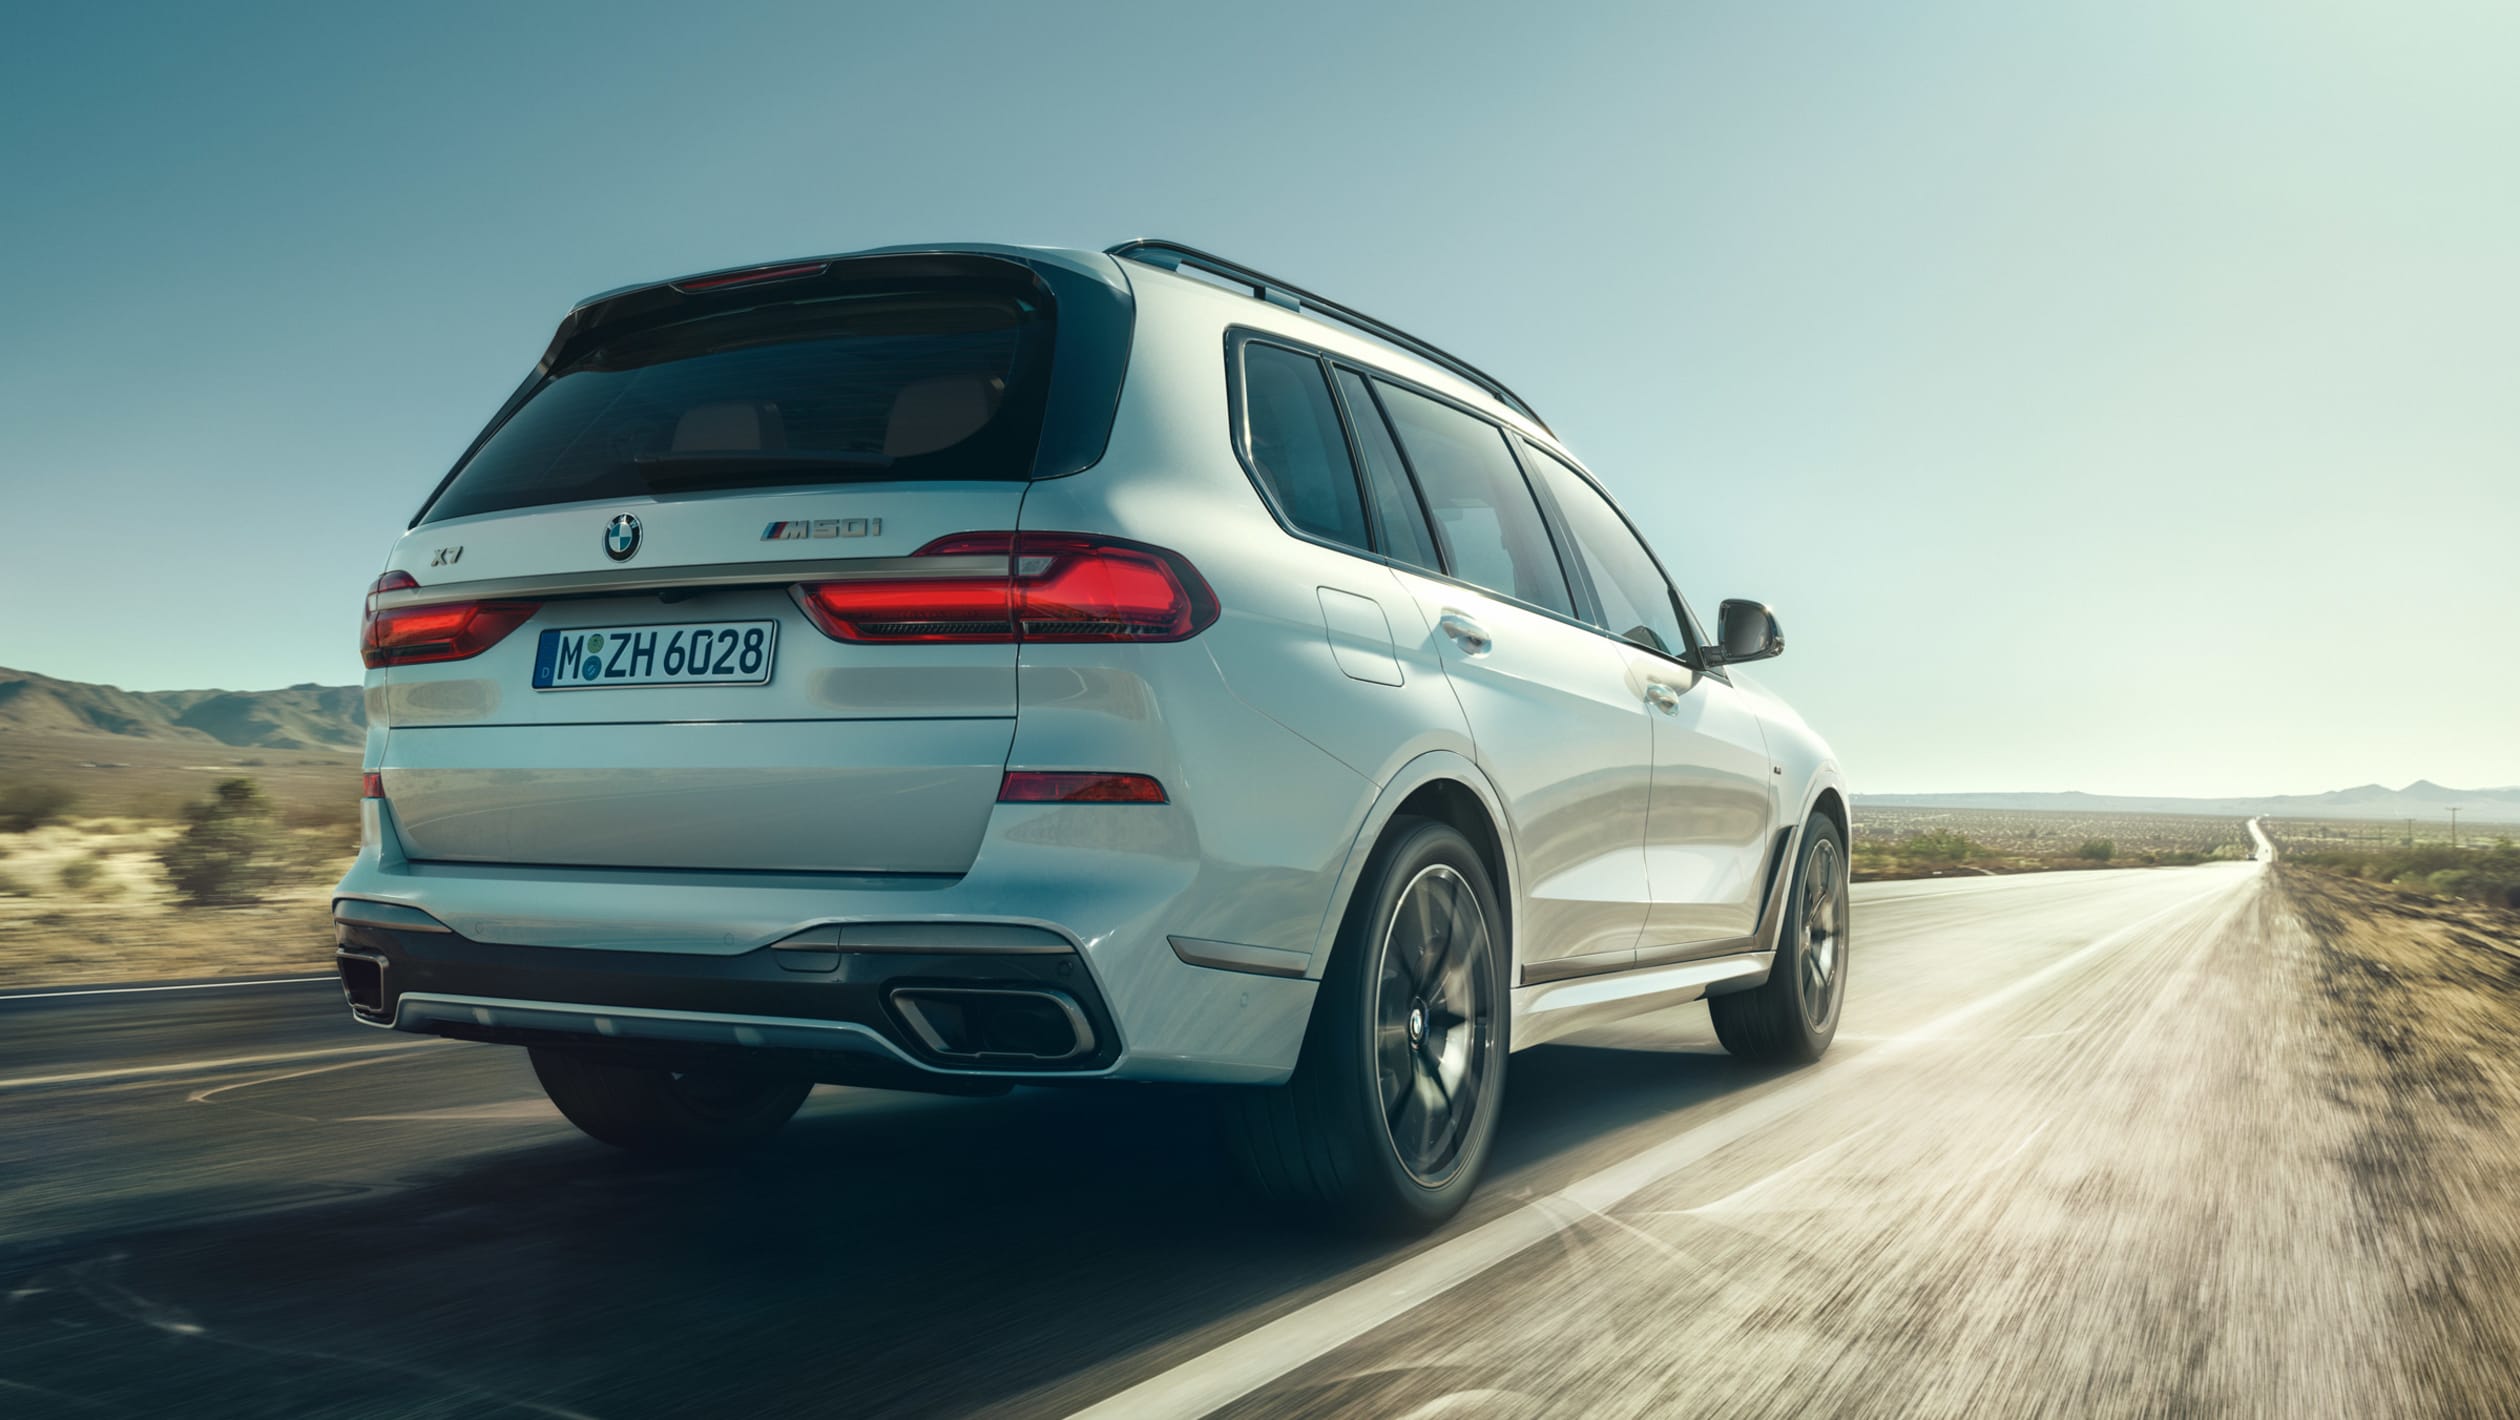 BMW launches hot M50i versions of X5 and X7 SUVs - pictures | Auto Express